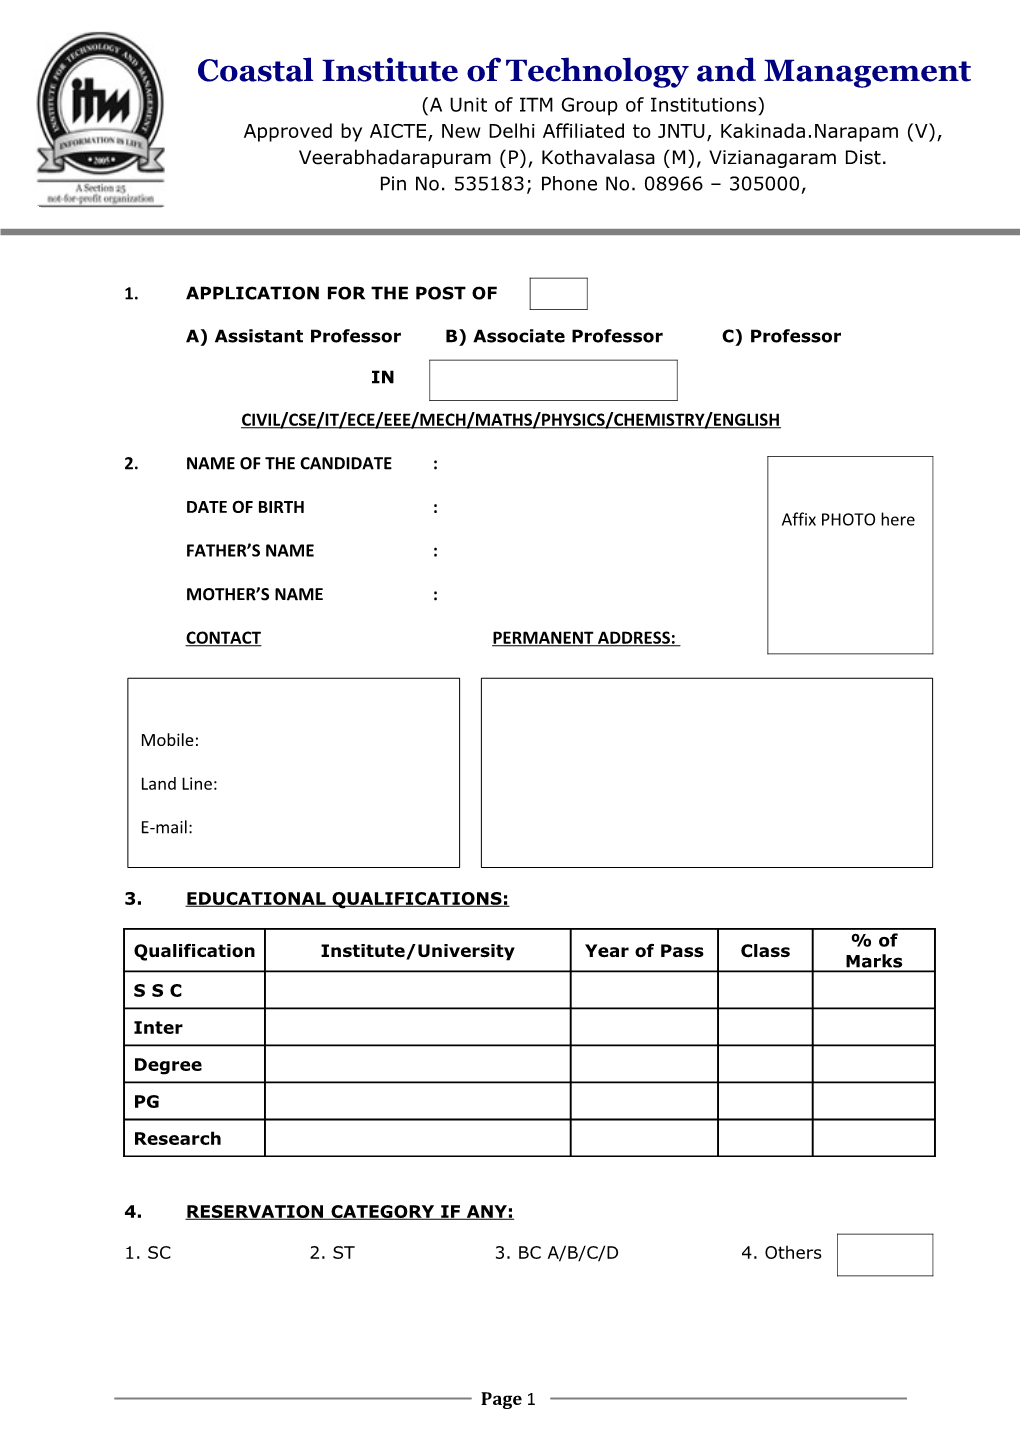 1.Application for the Post Of